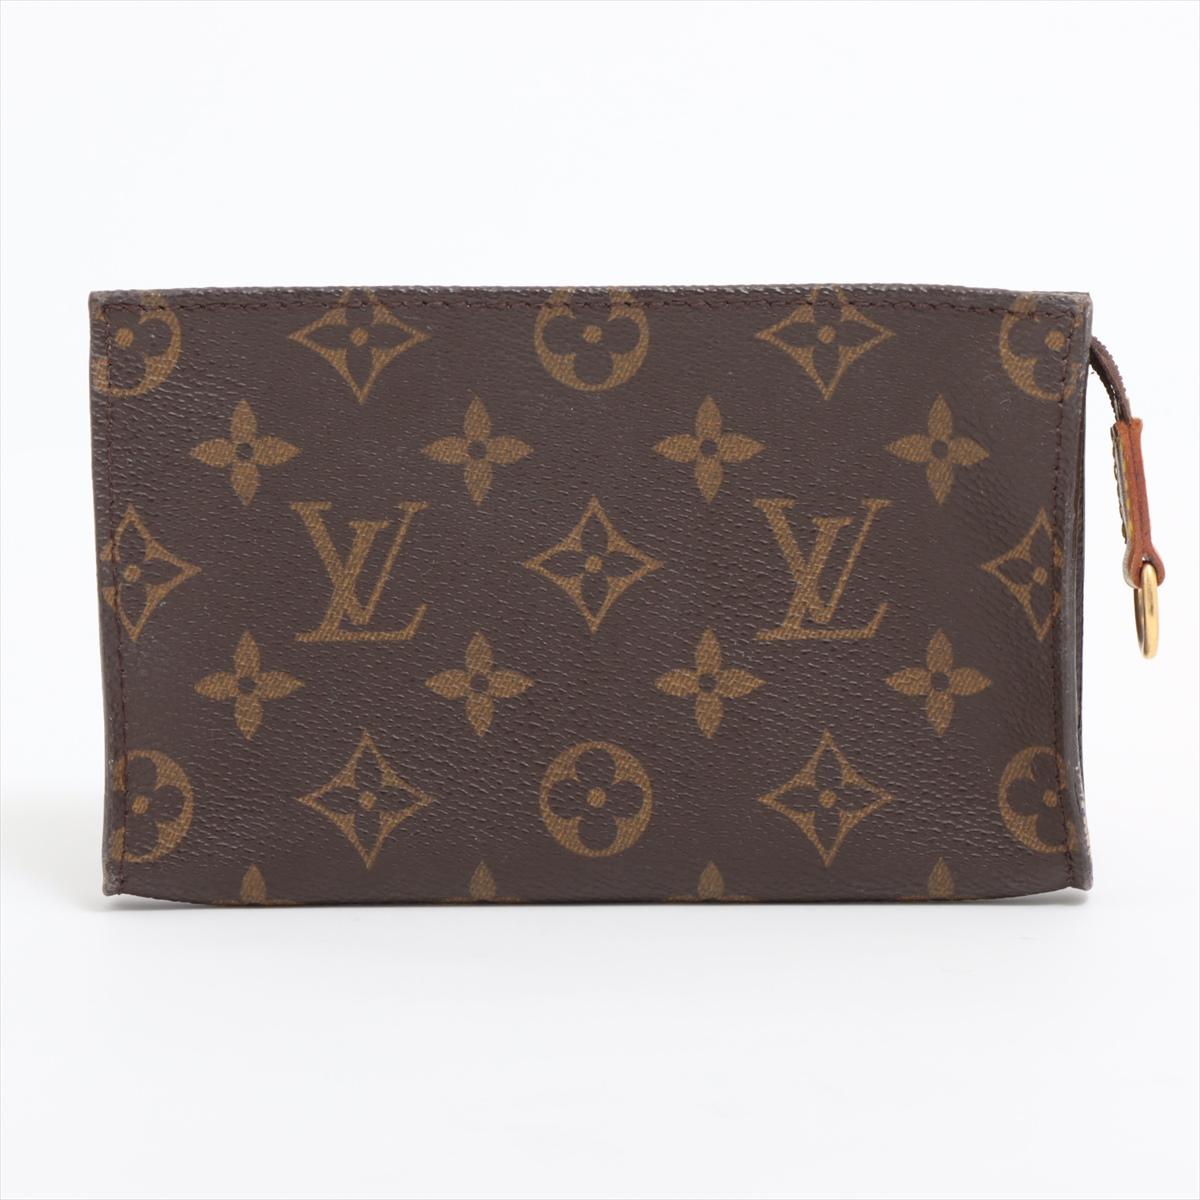 The Louis Vuitton Monogram Bucket PM Pouch a stylish and compact accessory that captures the iconic charm of Louis Vuitton. Meticulously crafted with the signature Monogram canvas, the pouch showcases brand's timeless pattern, reflecting a legacy of